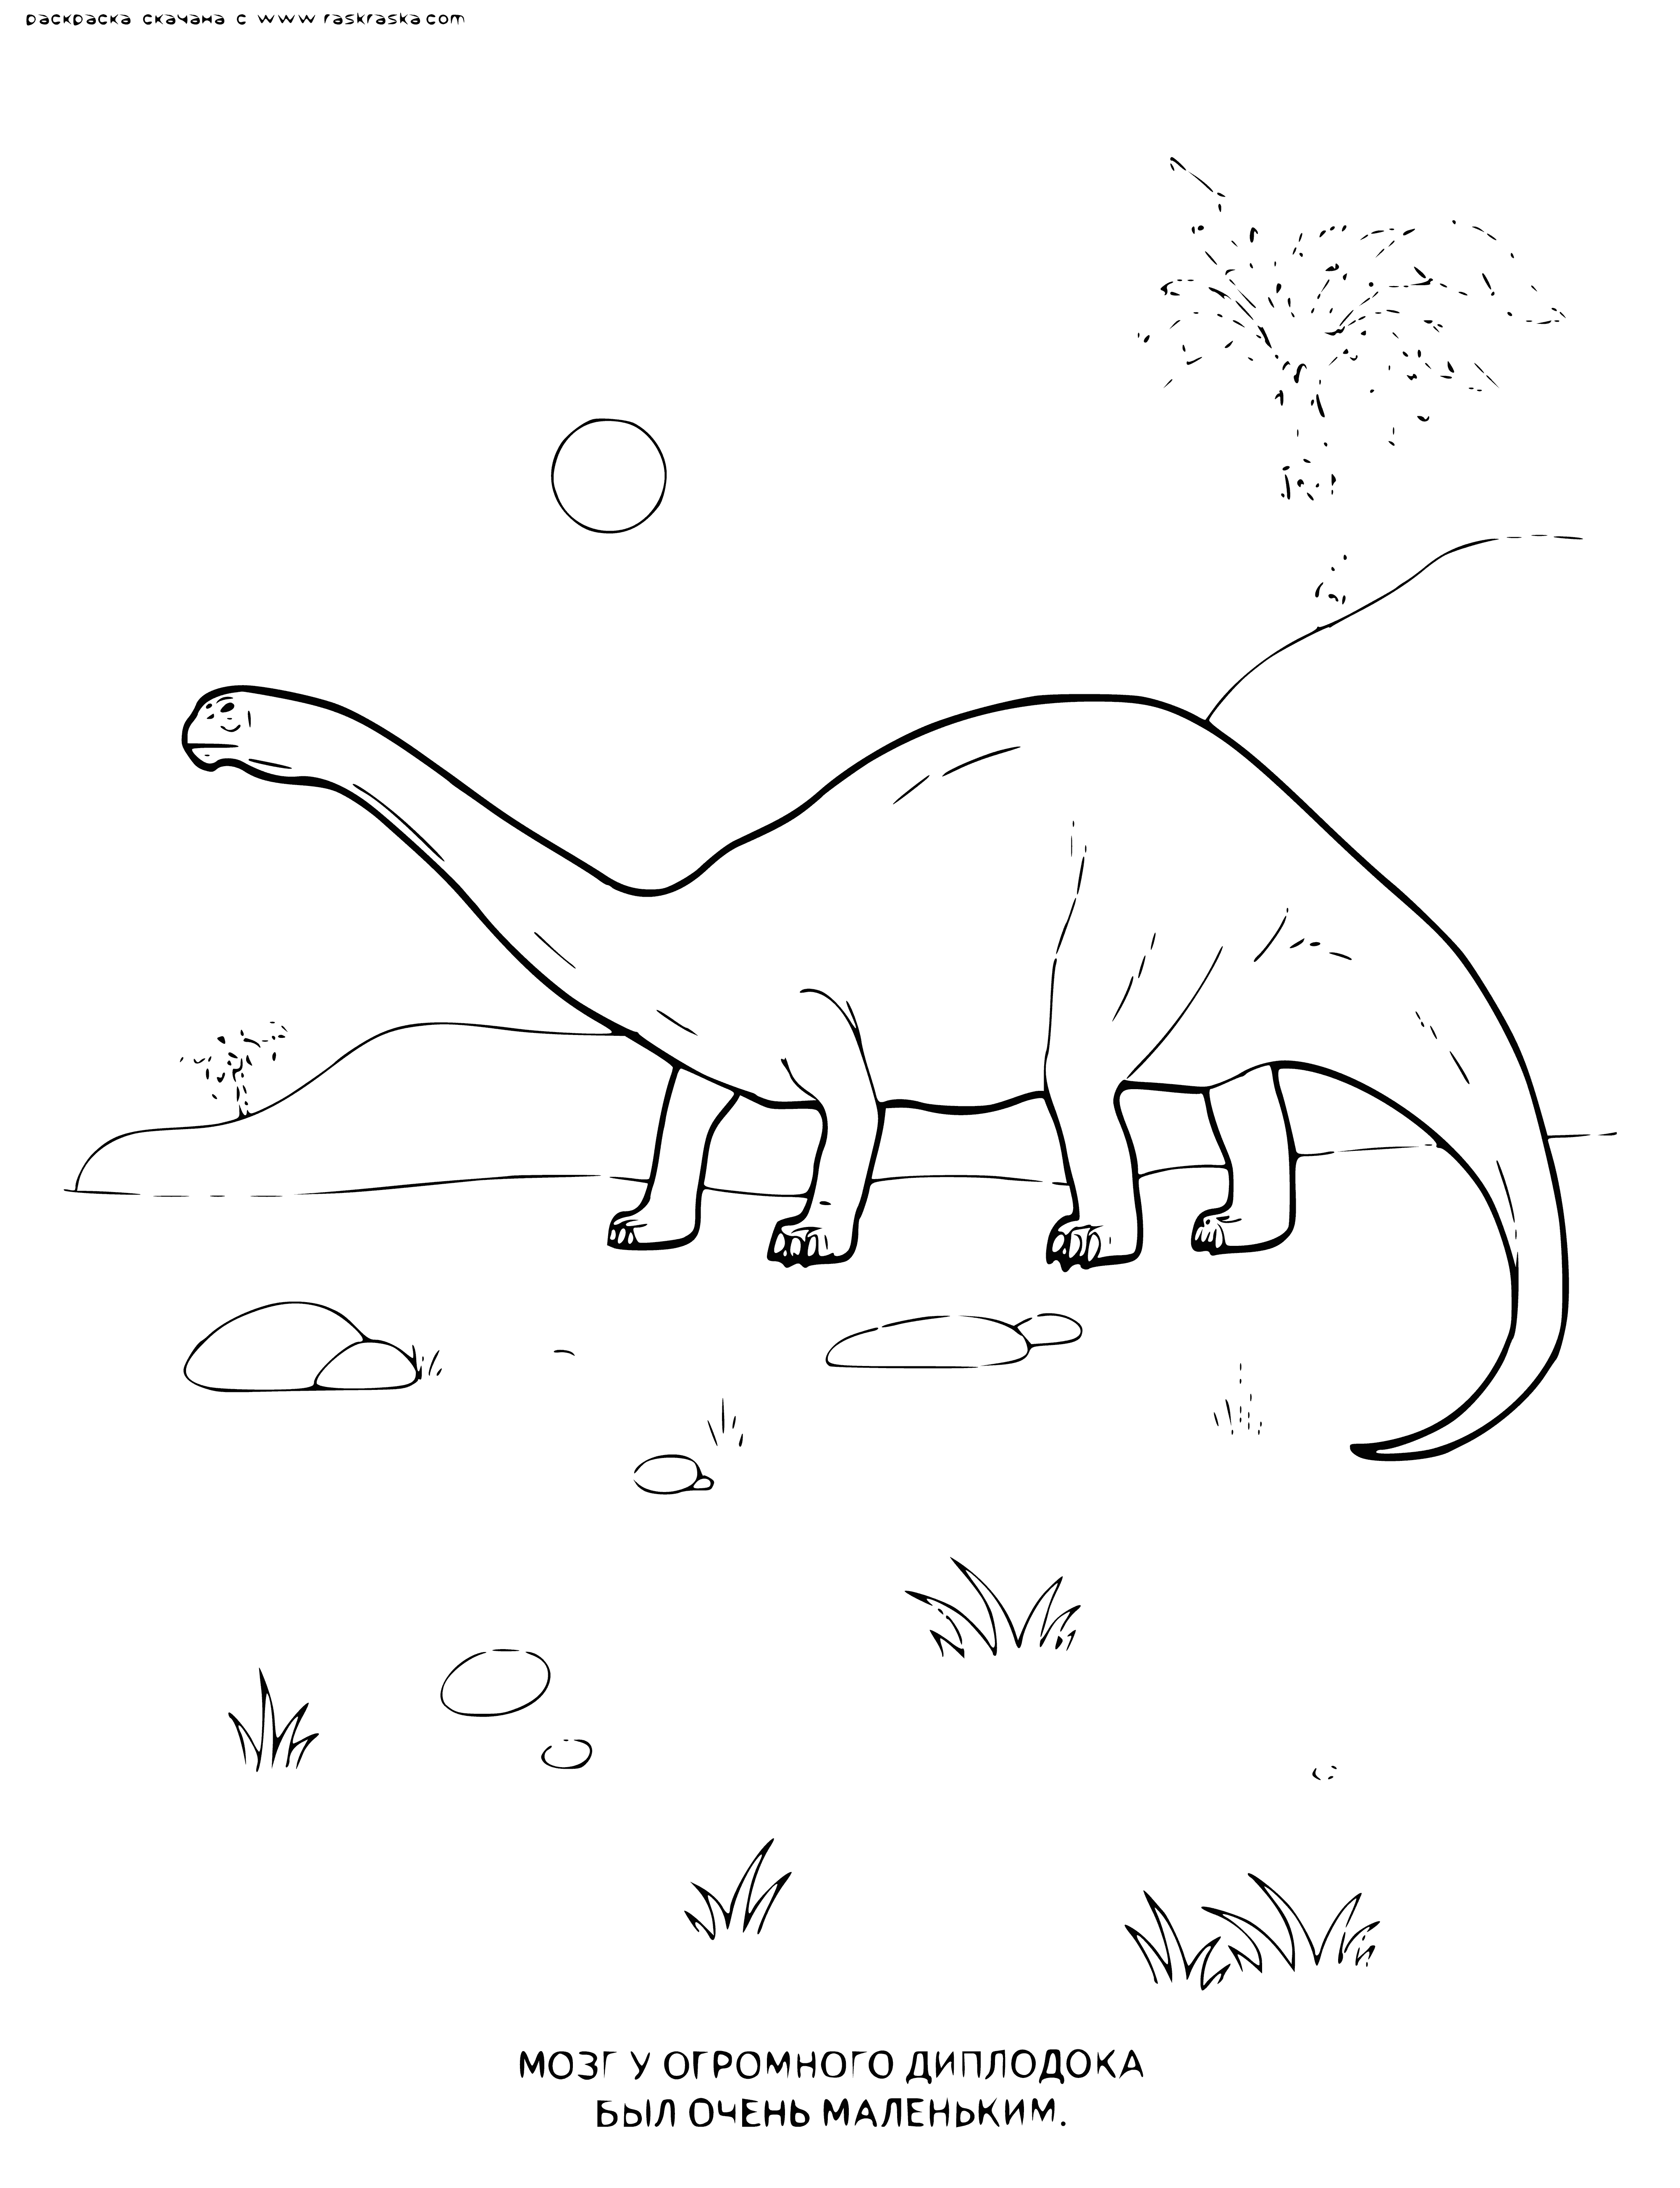 coloring page: Long, thin dino with long neck, small head; thin legs and long tail.